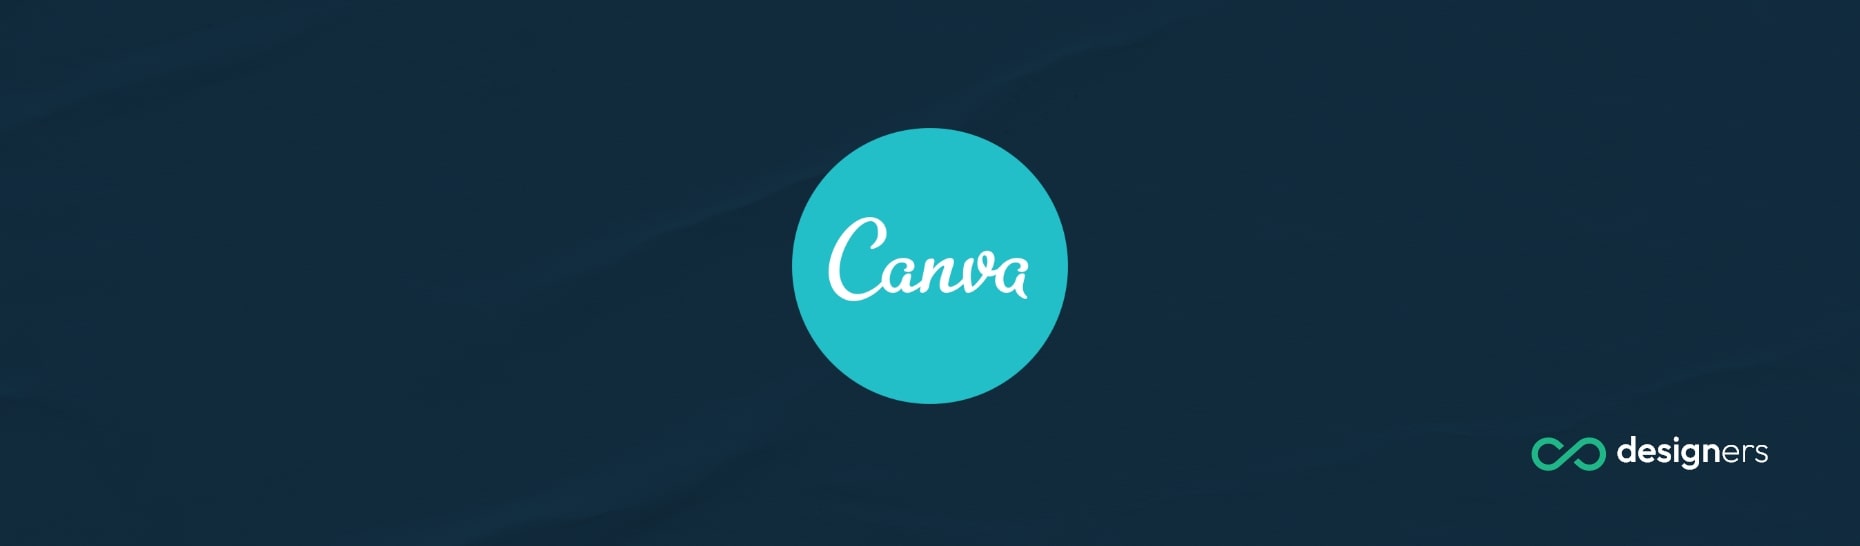 How Do I Cut a Shape in Canva?